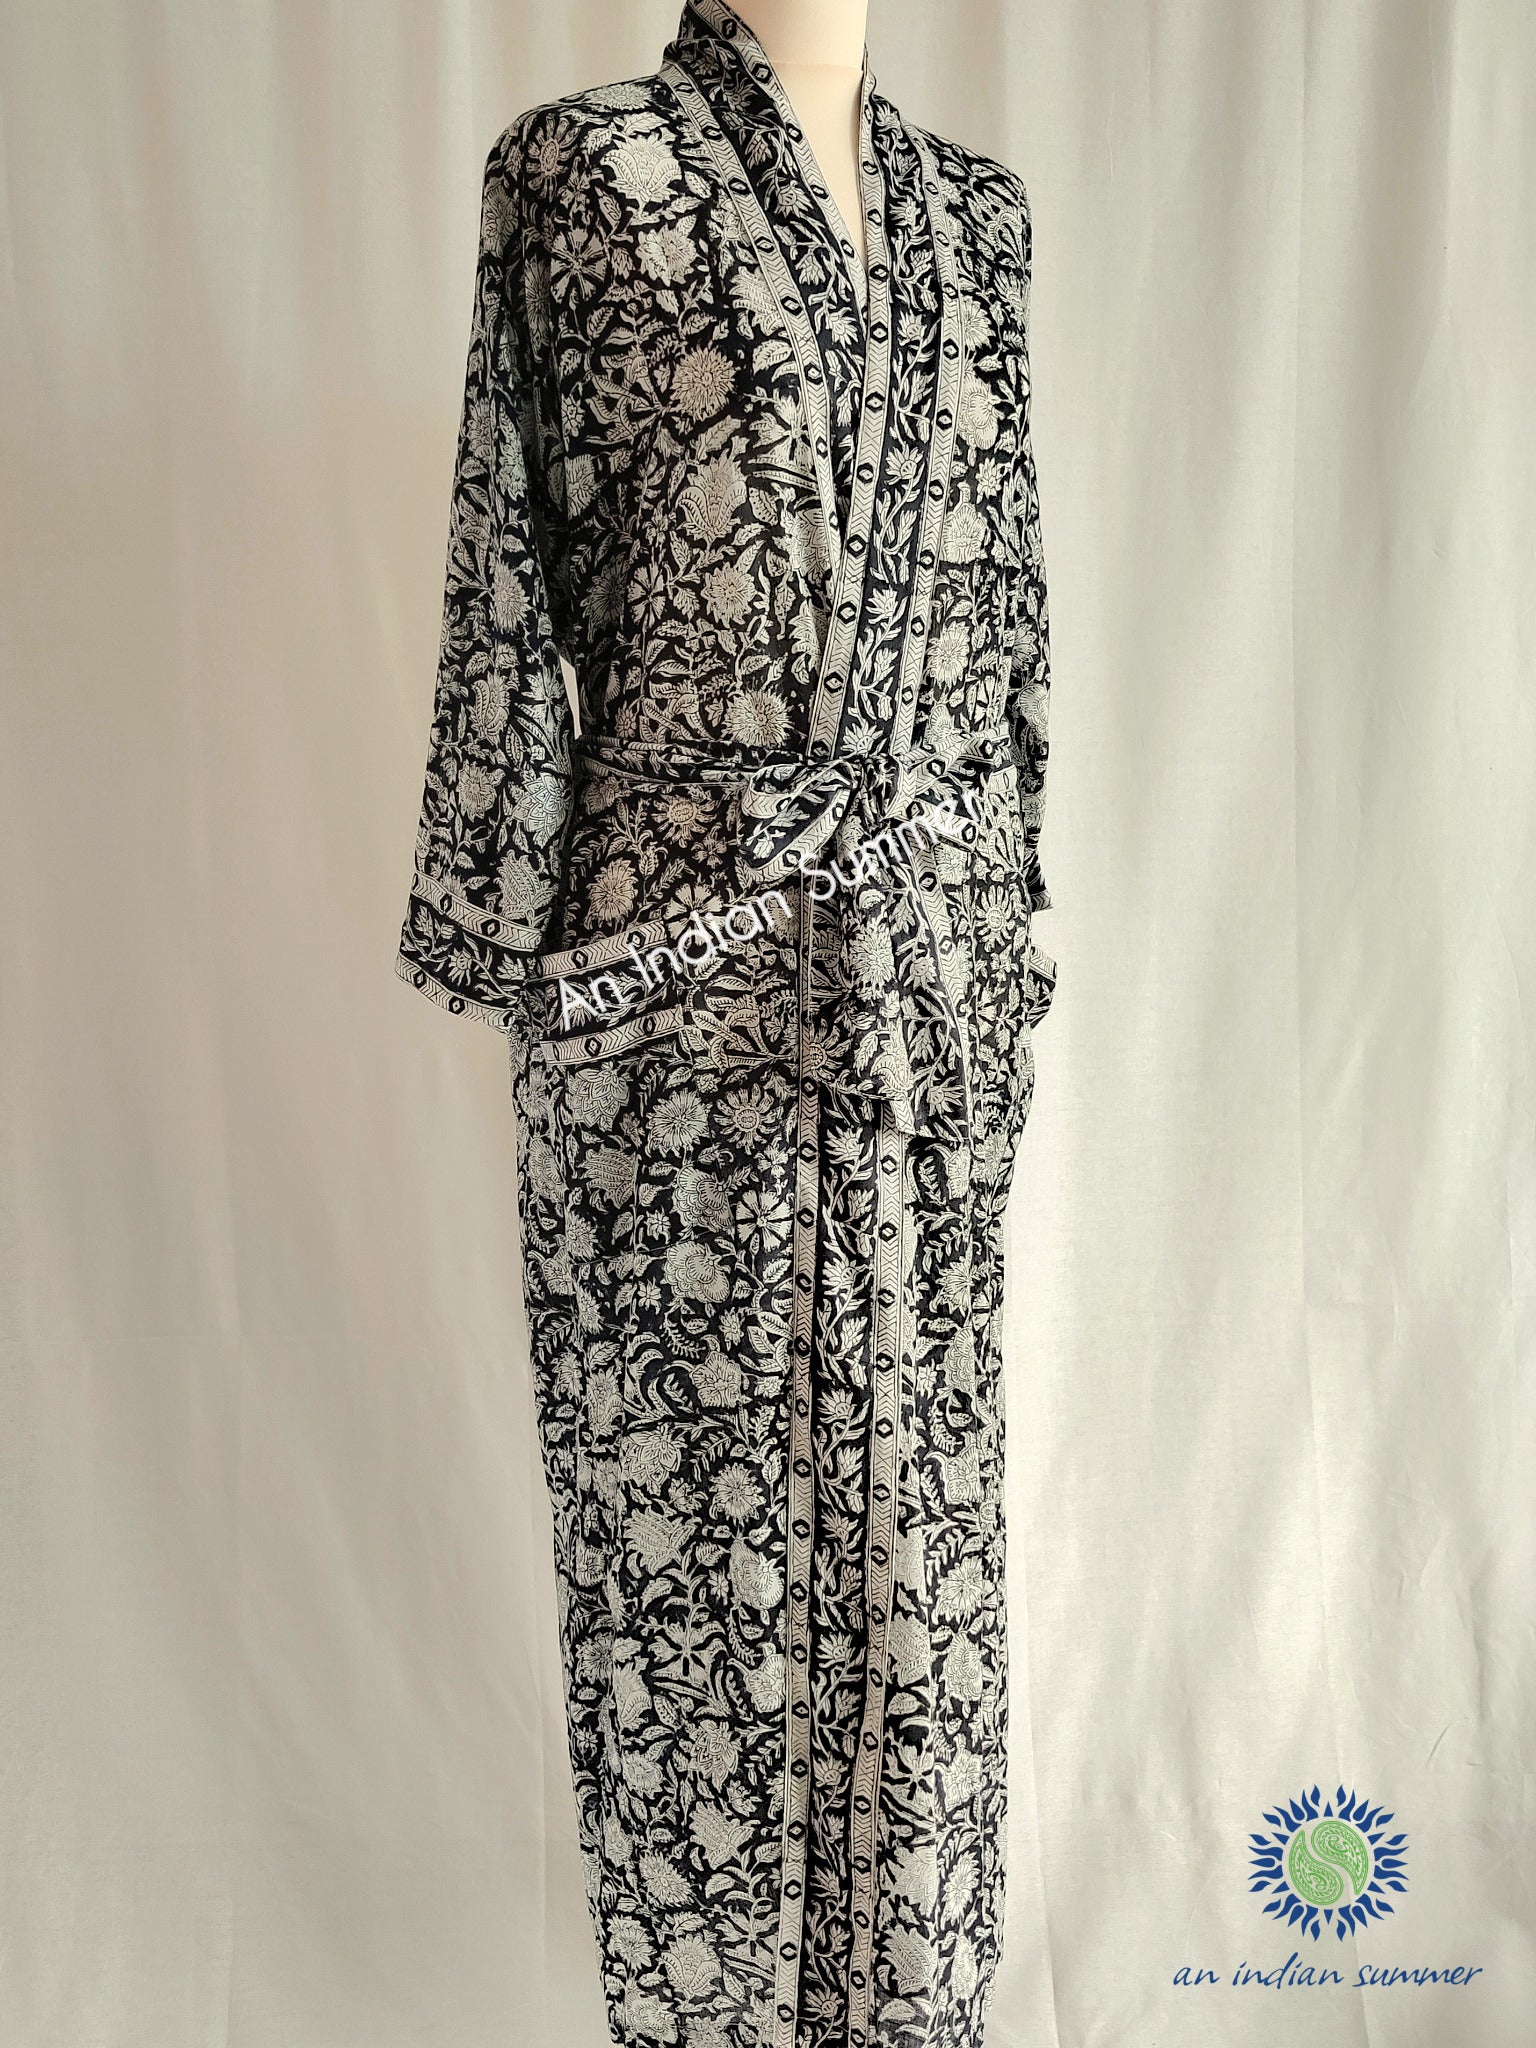 Long Kimono Robe | Meadow | Black & White | Floral Block Print | Hand Block Printed | Cotton Voile | An Indian Summer | Seasonless Timeless Sustainable Ethical Authentic Artisan Conscious Clothing Lifestyle Brand